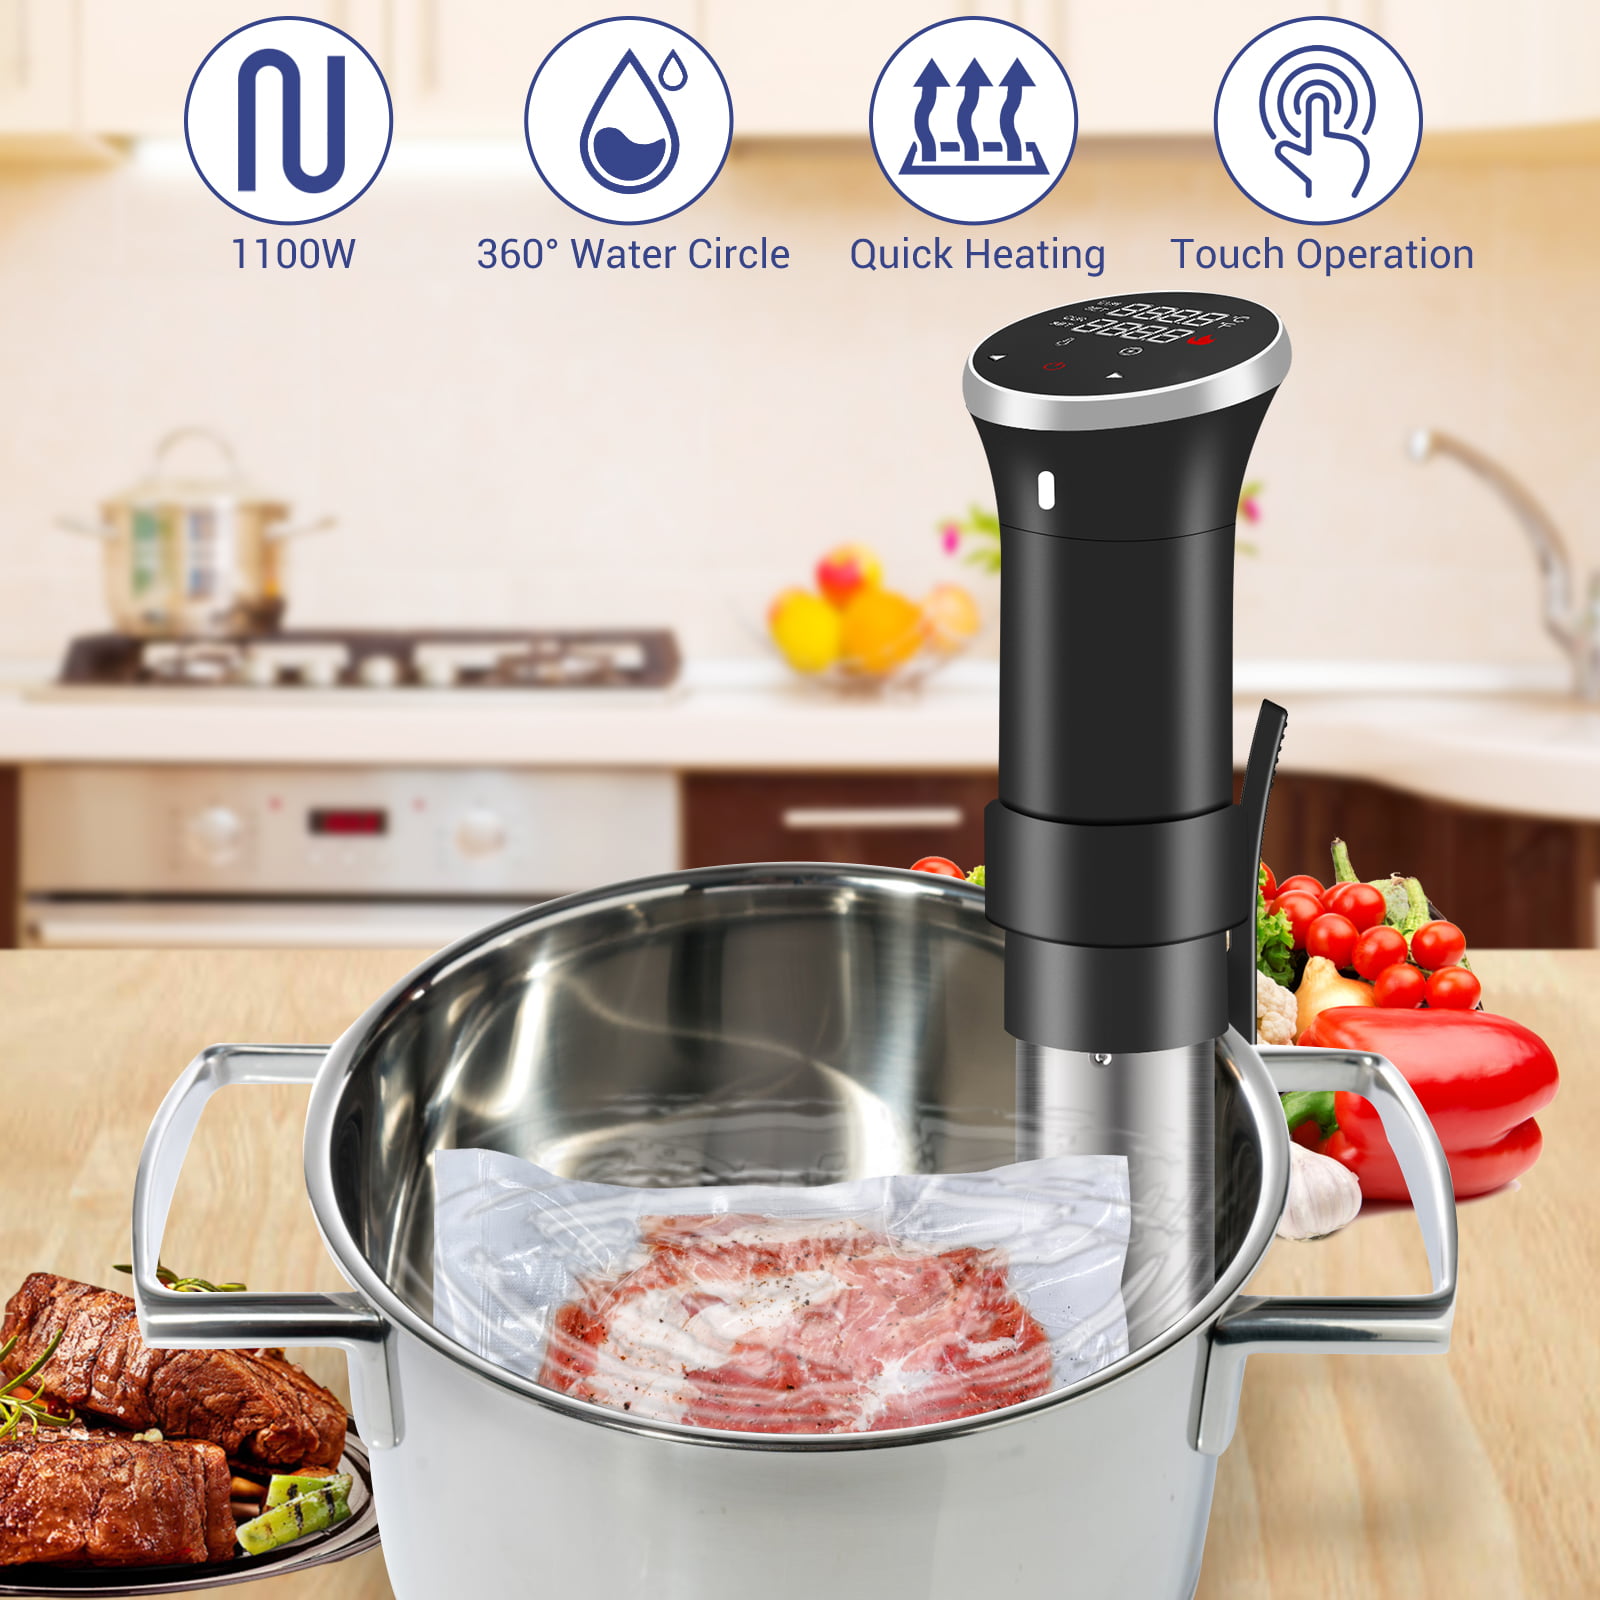 Vegetables & Wine Dash Chef Series Stainless Steel Sous Vide Immersion Circulator with LED Digital Timer Display Seafood Temperature Control with Chill Function for Steak Poultry 